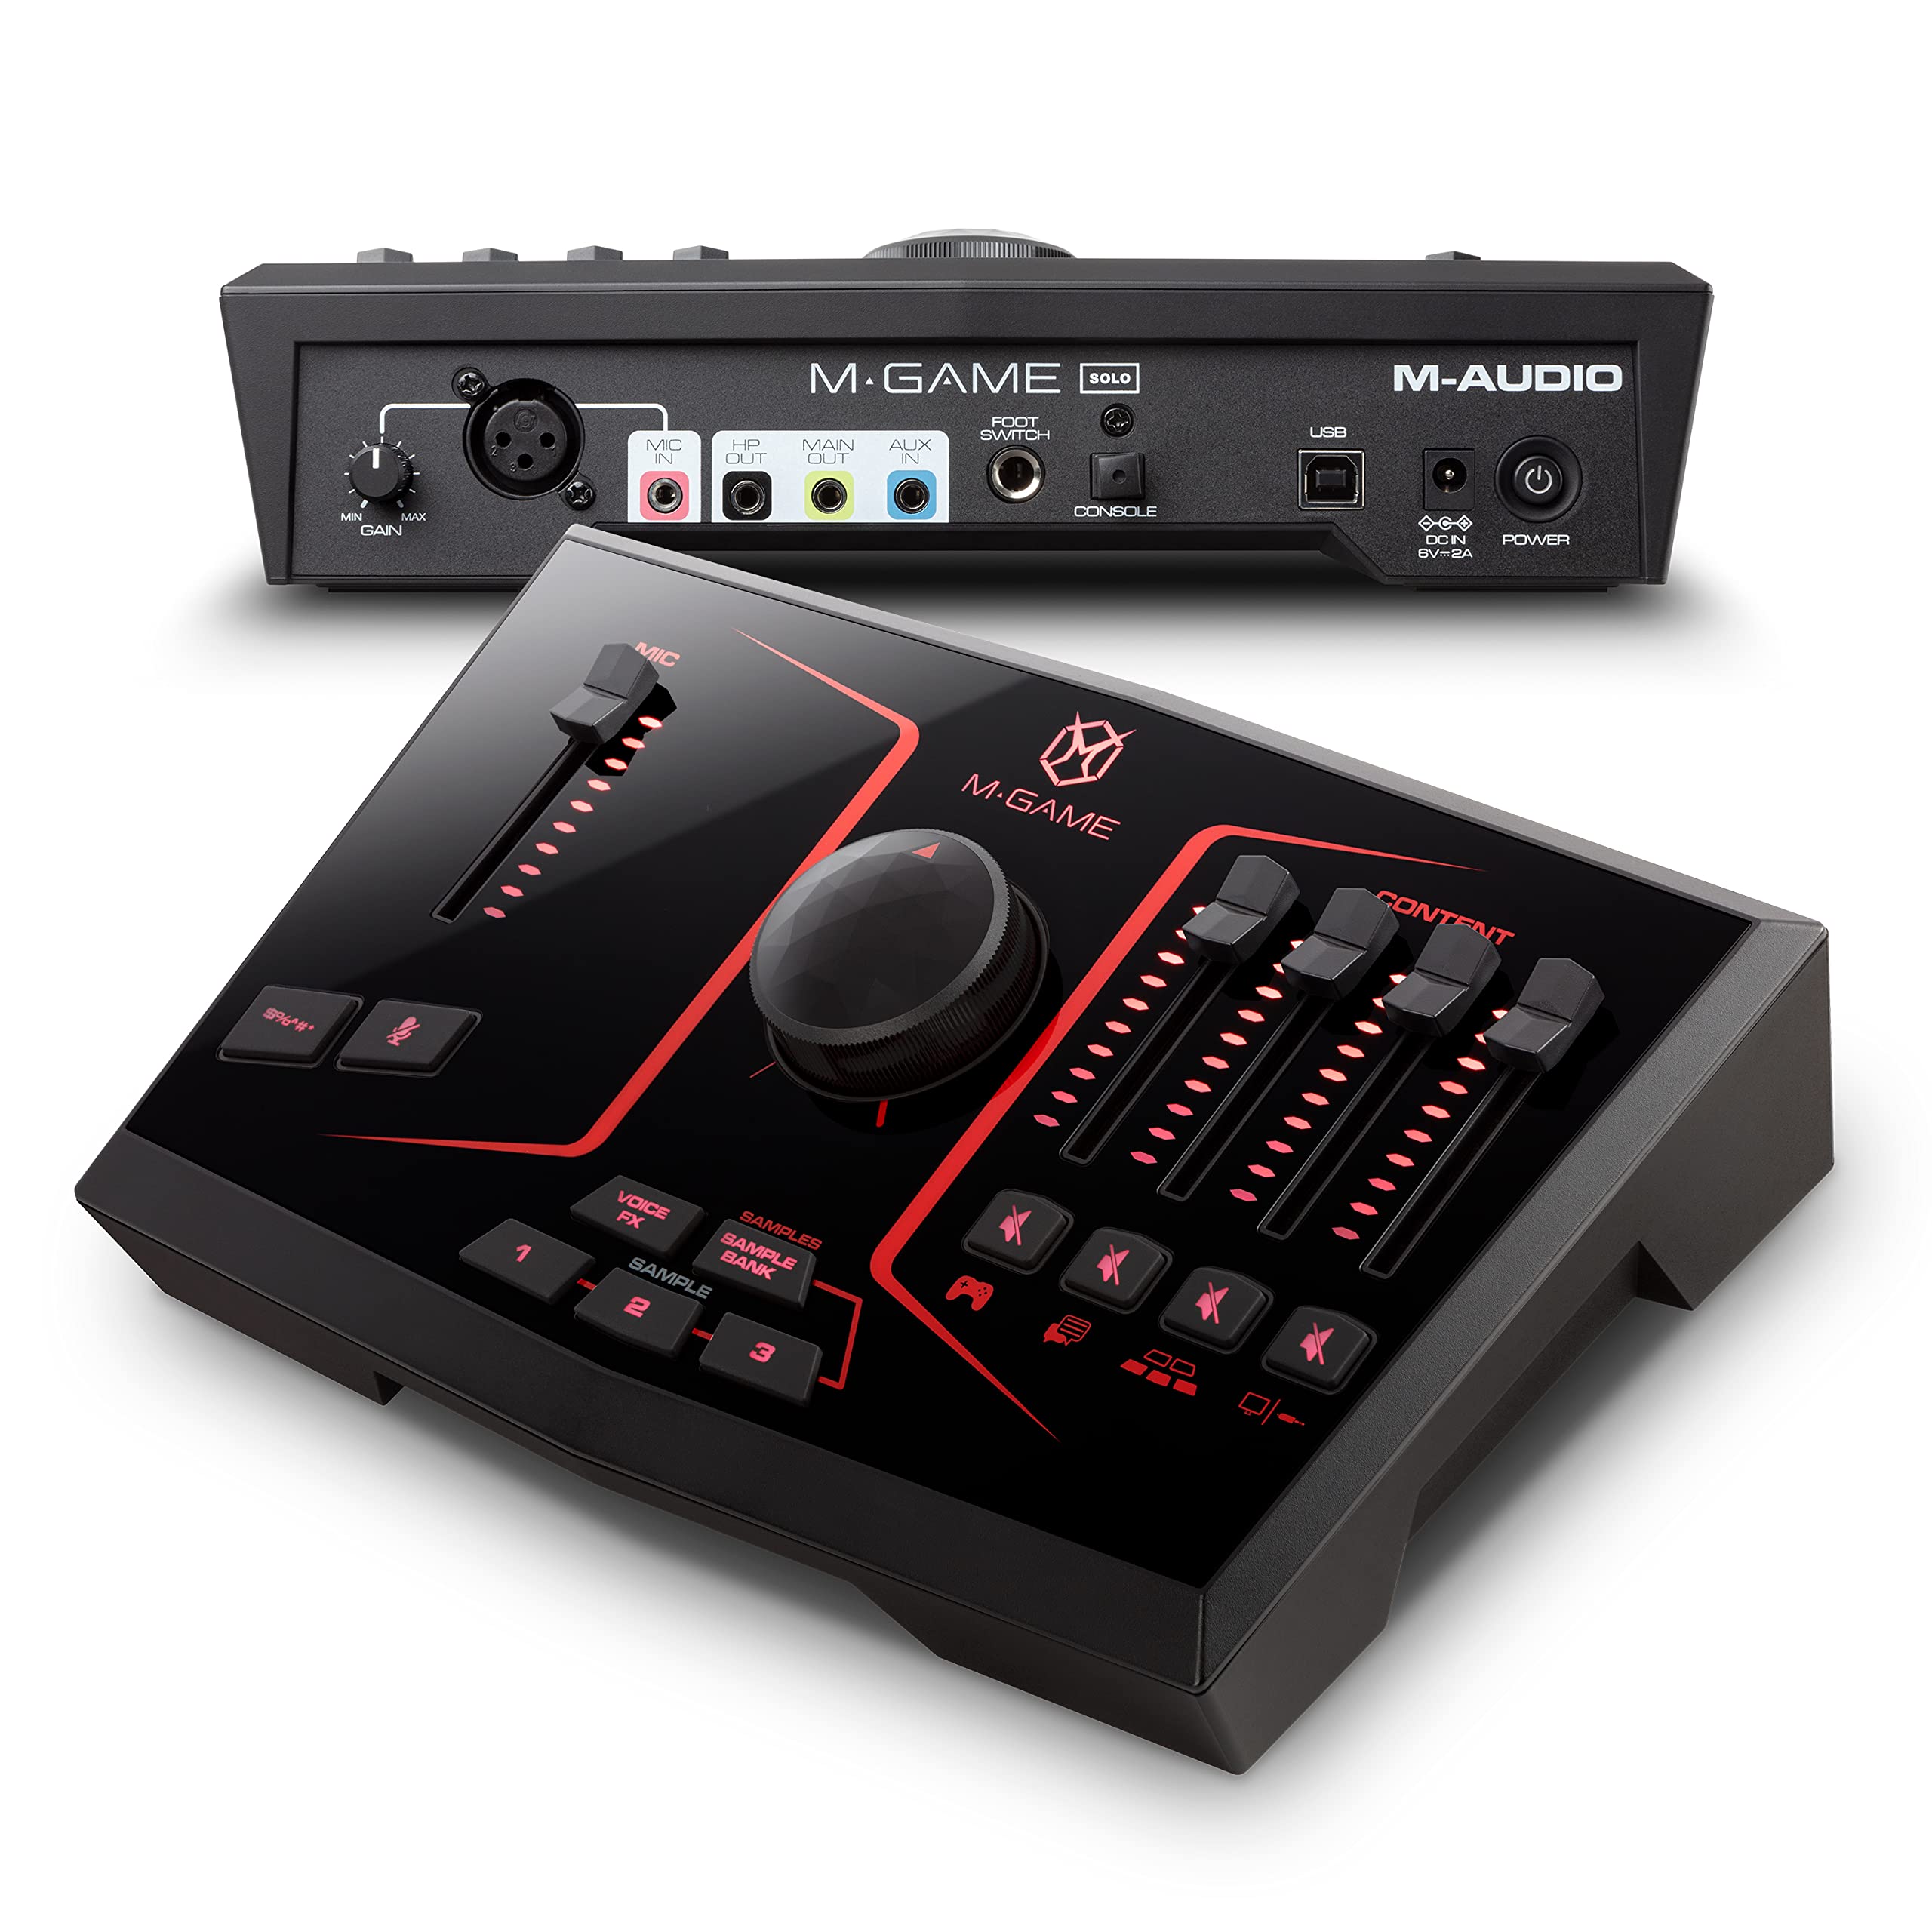 M-Audio M-Game Solo USB Streaming Mixer/Interface w/ LED Lighting, Voice FX & Sampler $79 + Free Shipping